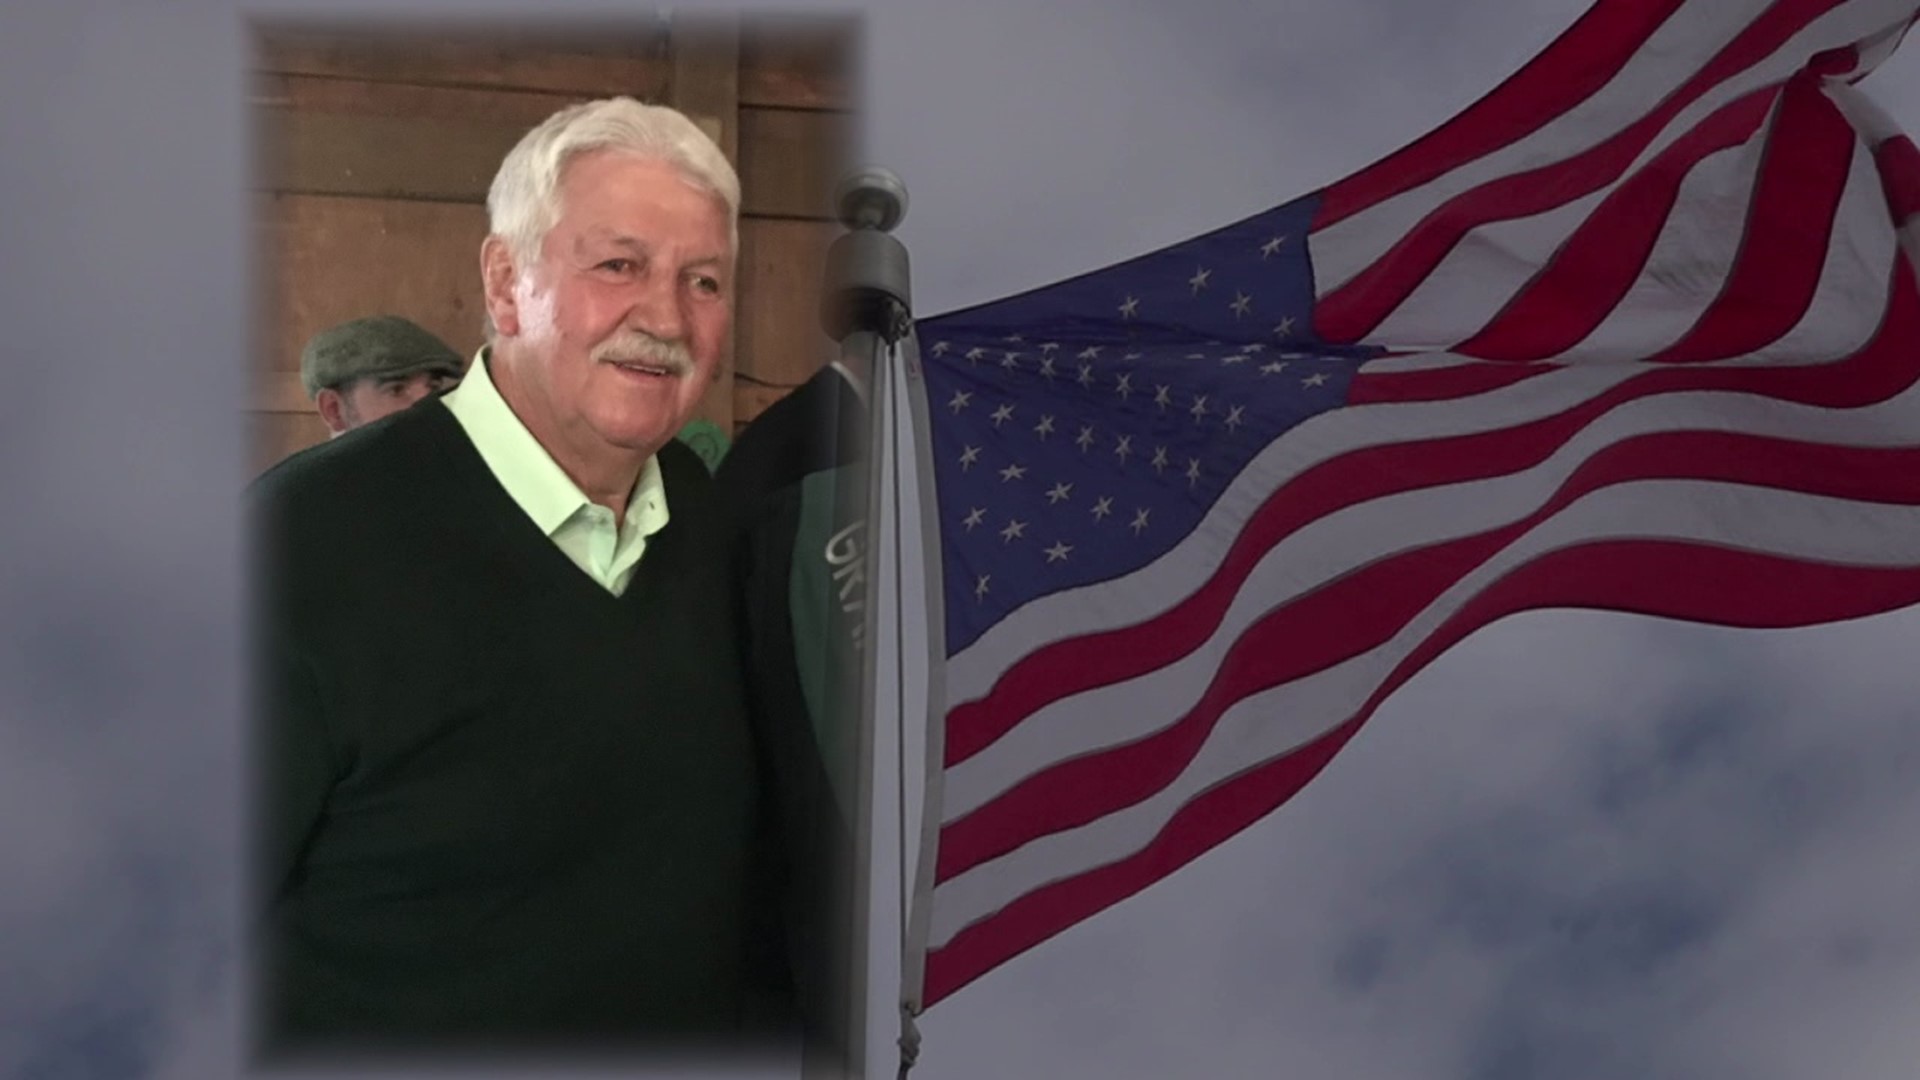 A well-known veteran and VFW post commander from Scranton passed away over the weekend. Newswatch 16's Courtney Harrison spoke with VFW members about their loss.